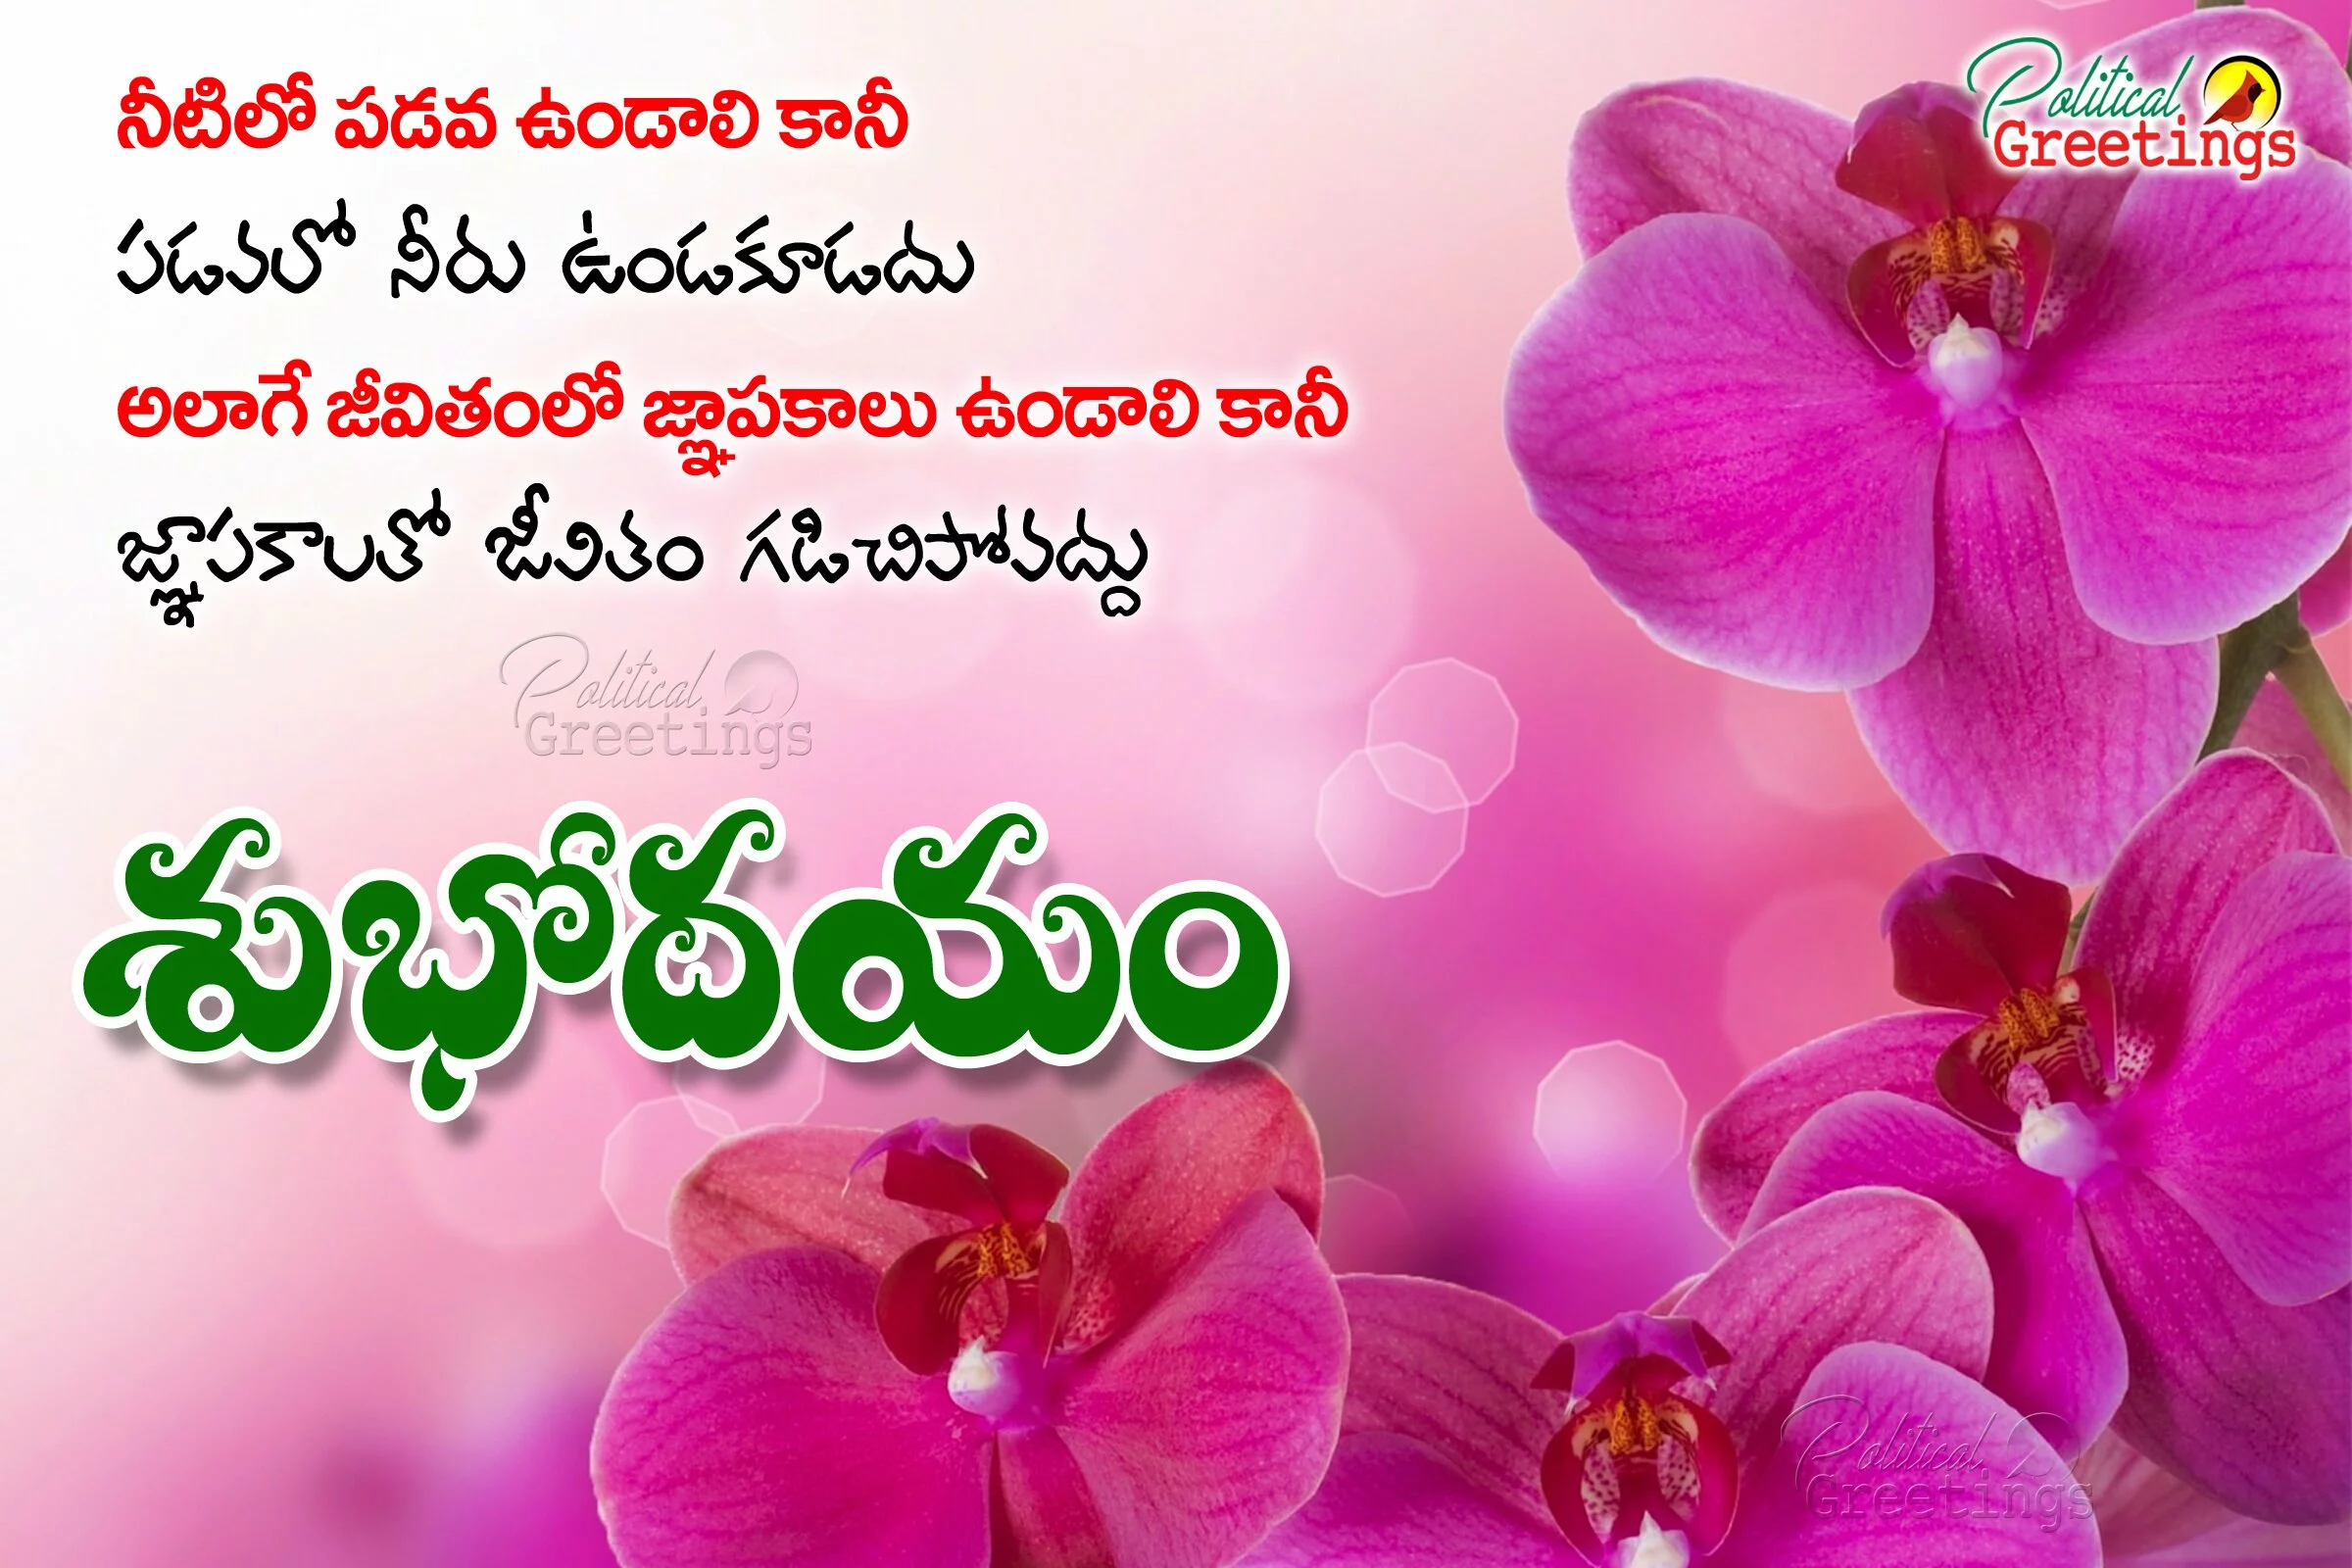 good-morning-telugu-life-quotes-images-with-motivational-messages2